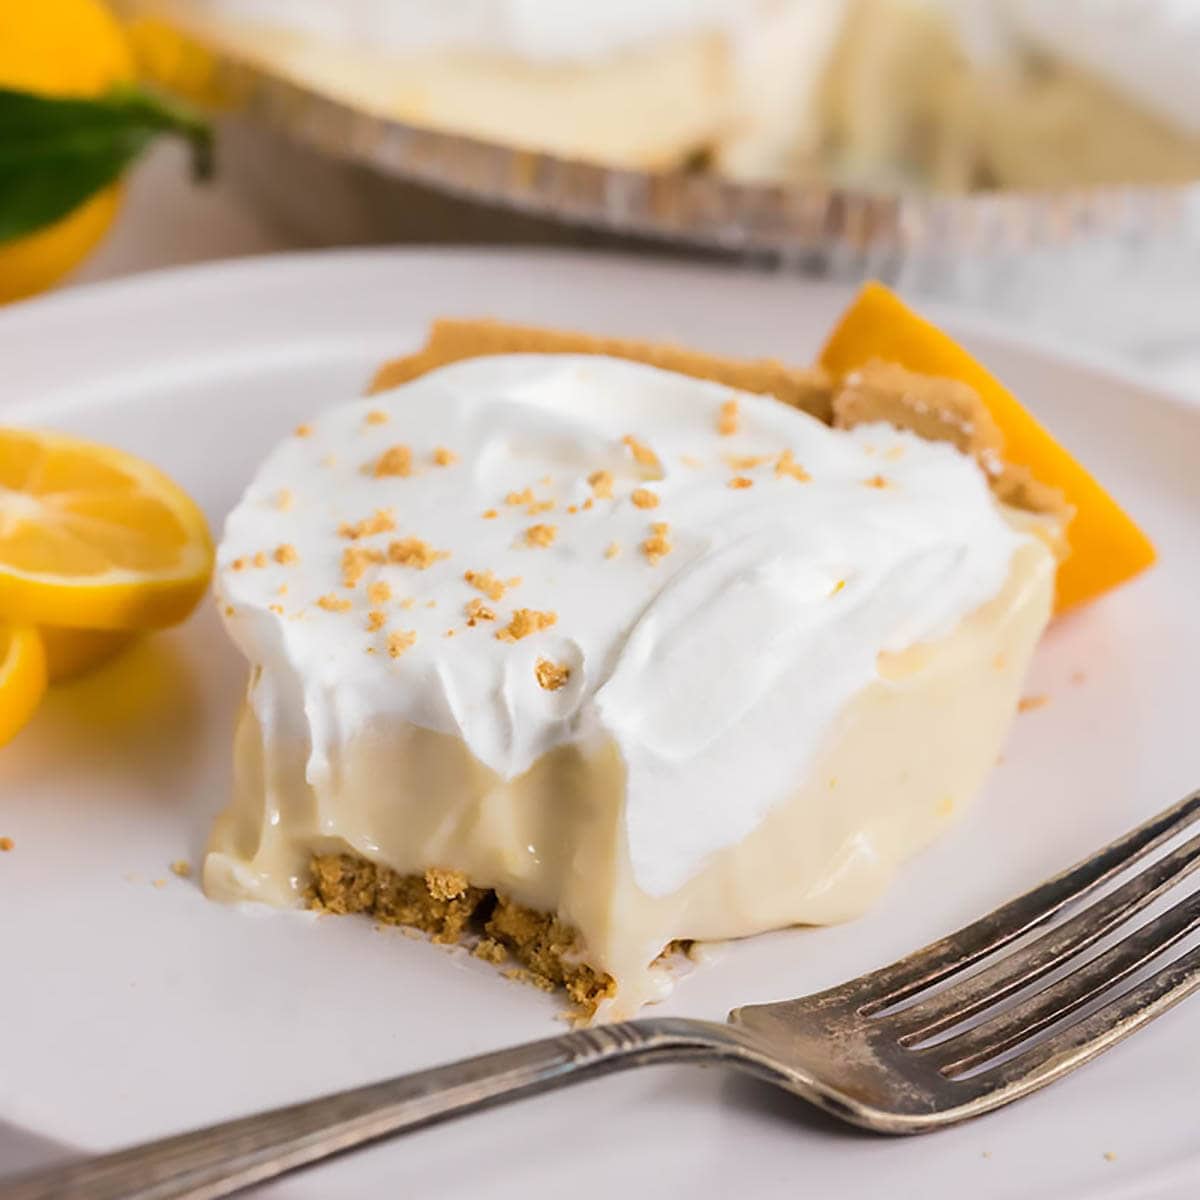 Lemon Icebox Pie on plate with fork. It's garnished with whipped cream and graham cracker crumbs.